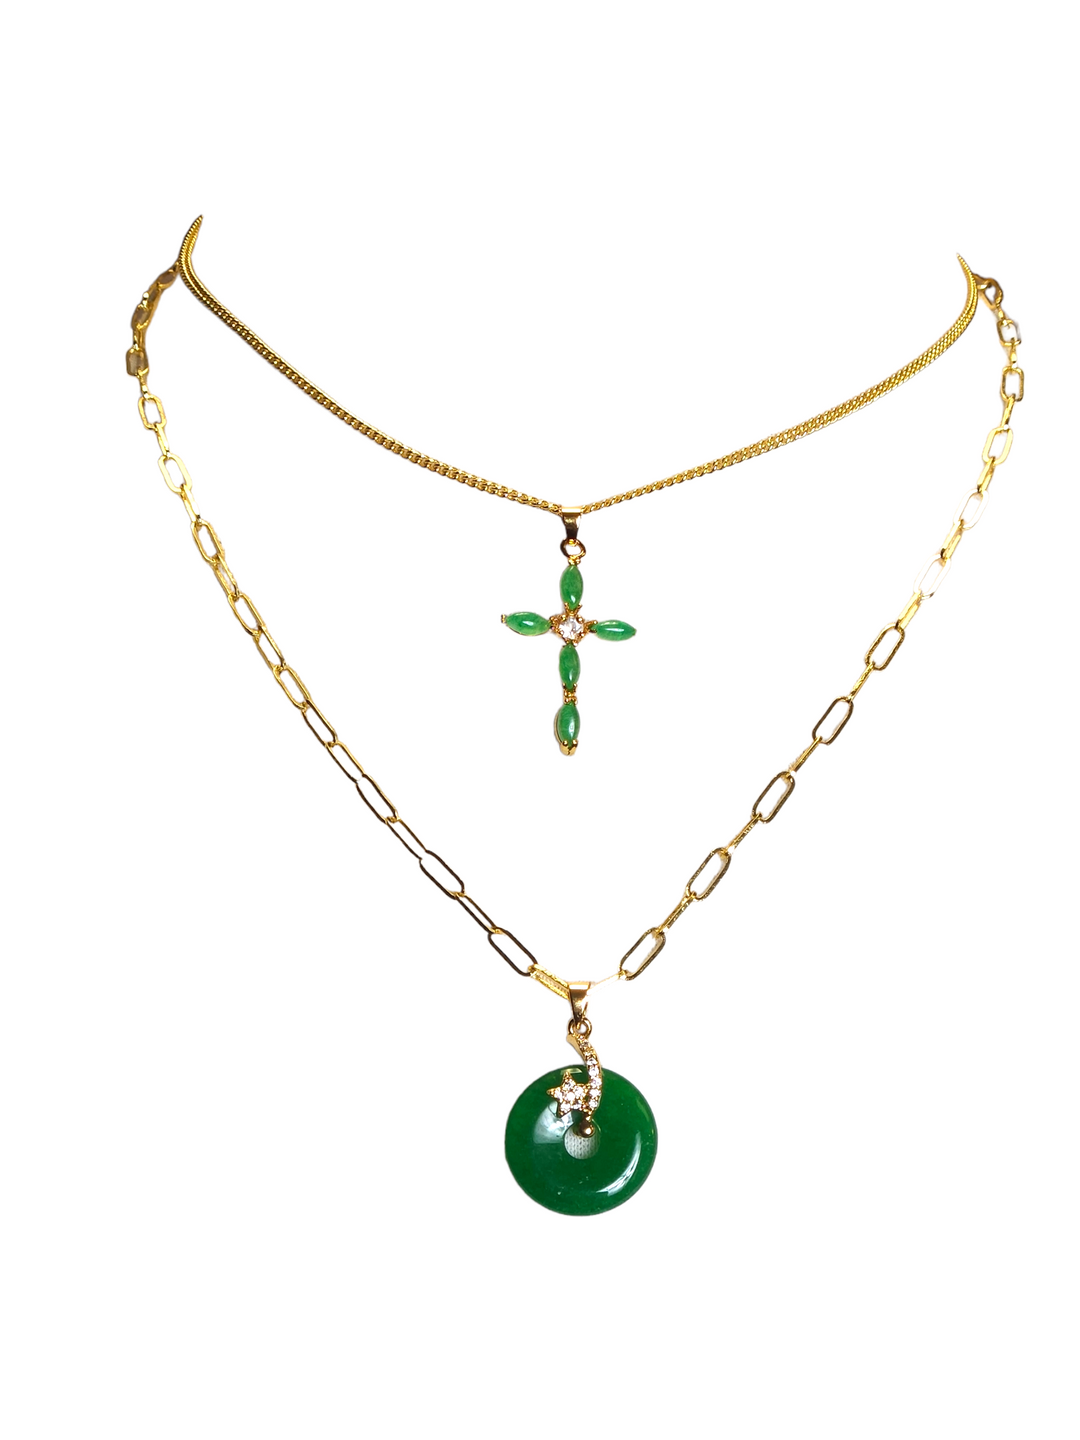 The Titania Jade Necklace Collection